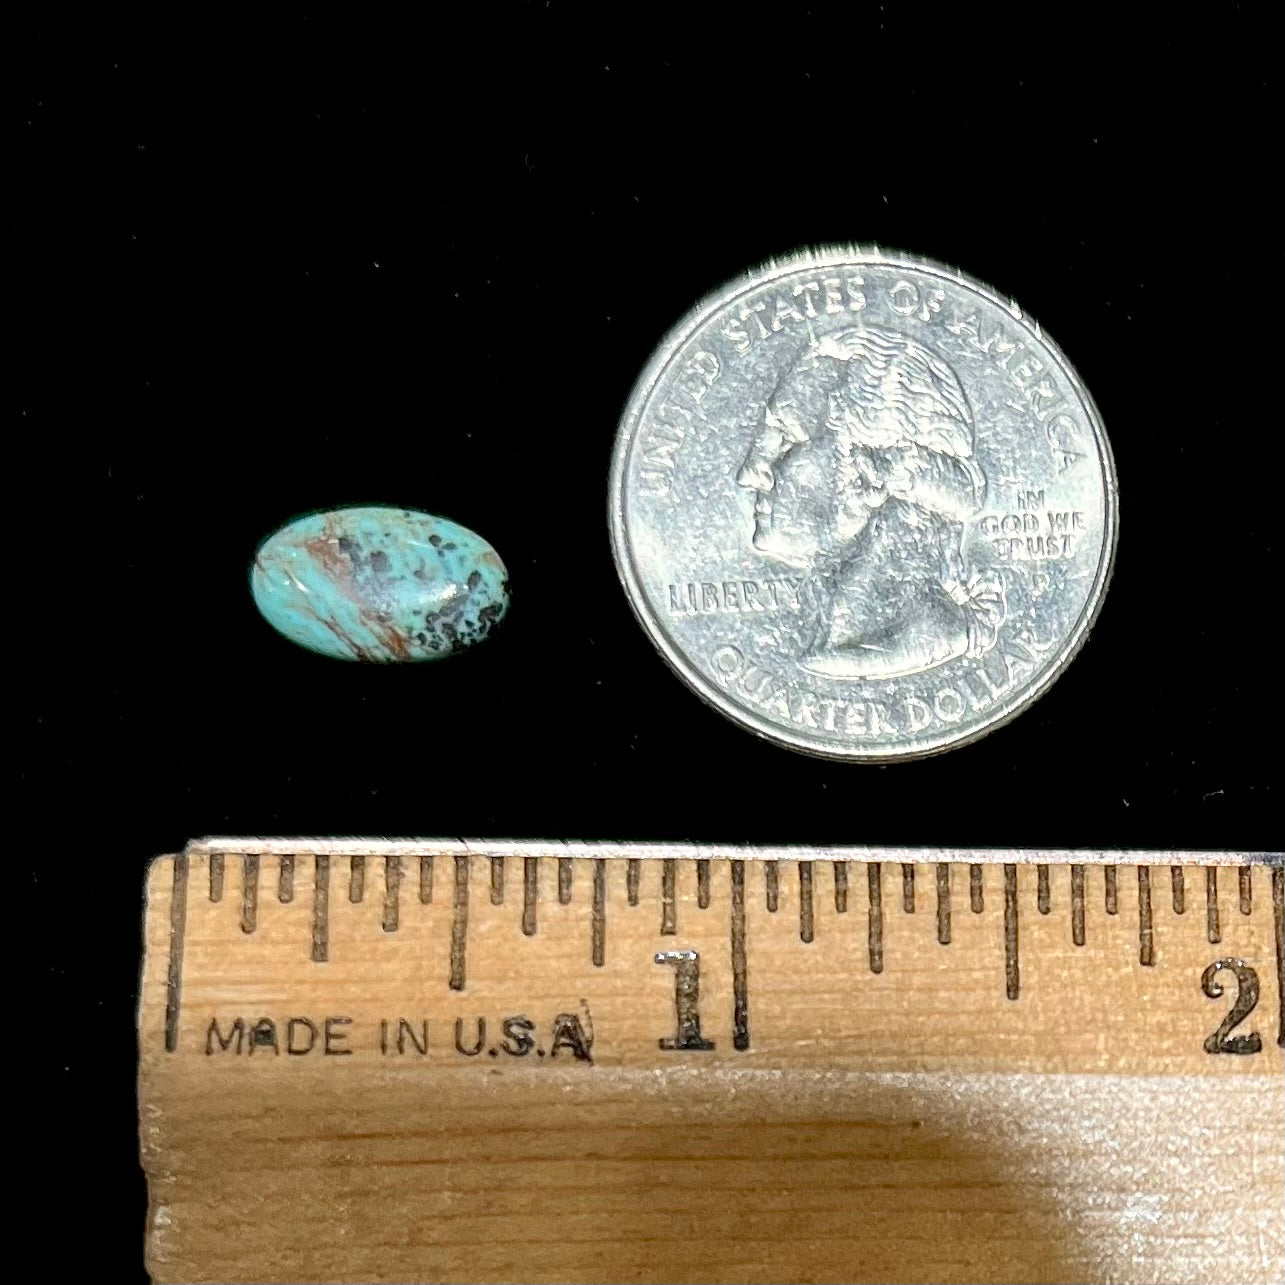 A loose, speckled, oval cabochon cut Valley Blue turquoise stone from Lander County, Nevada.